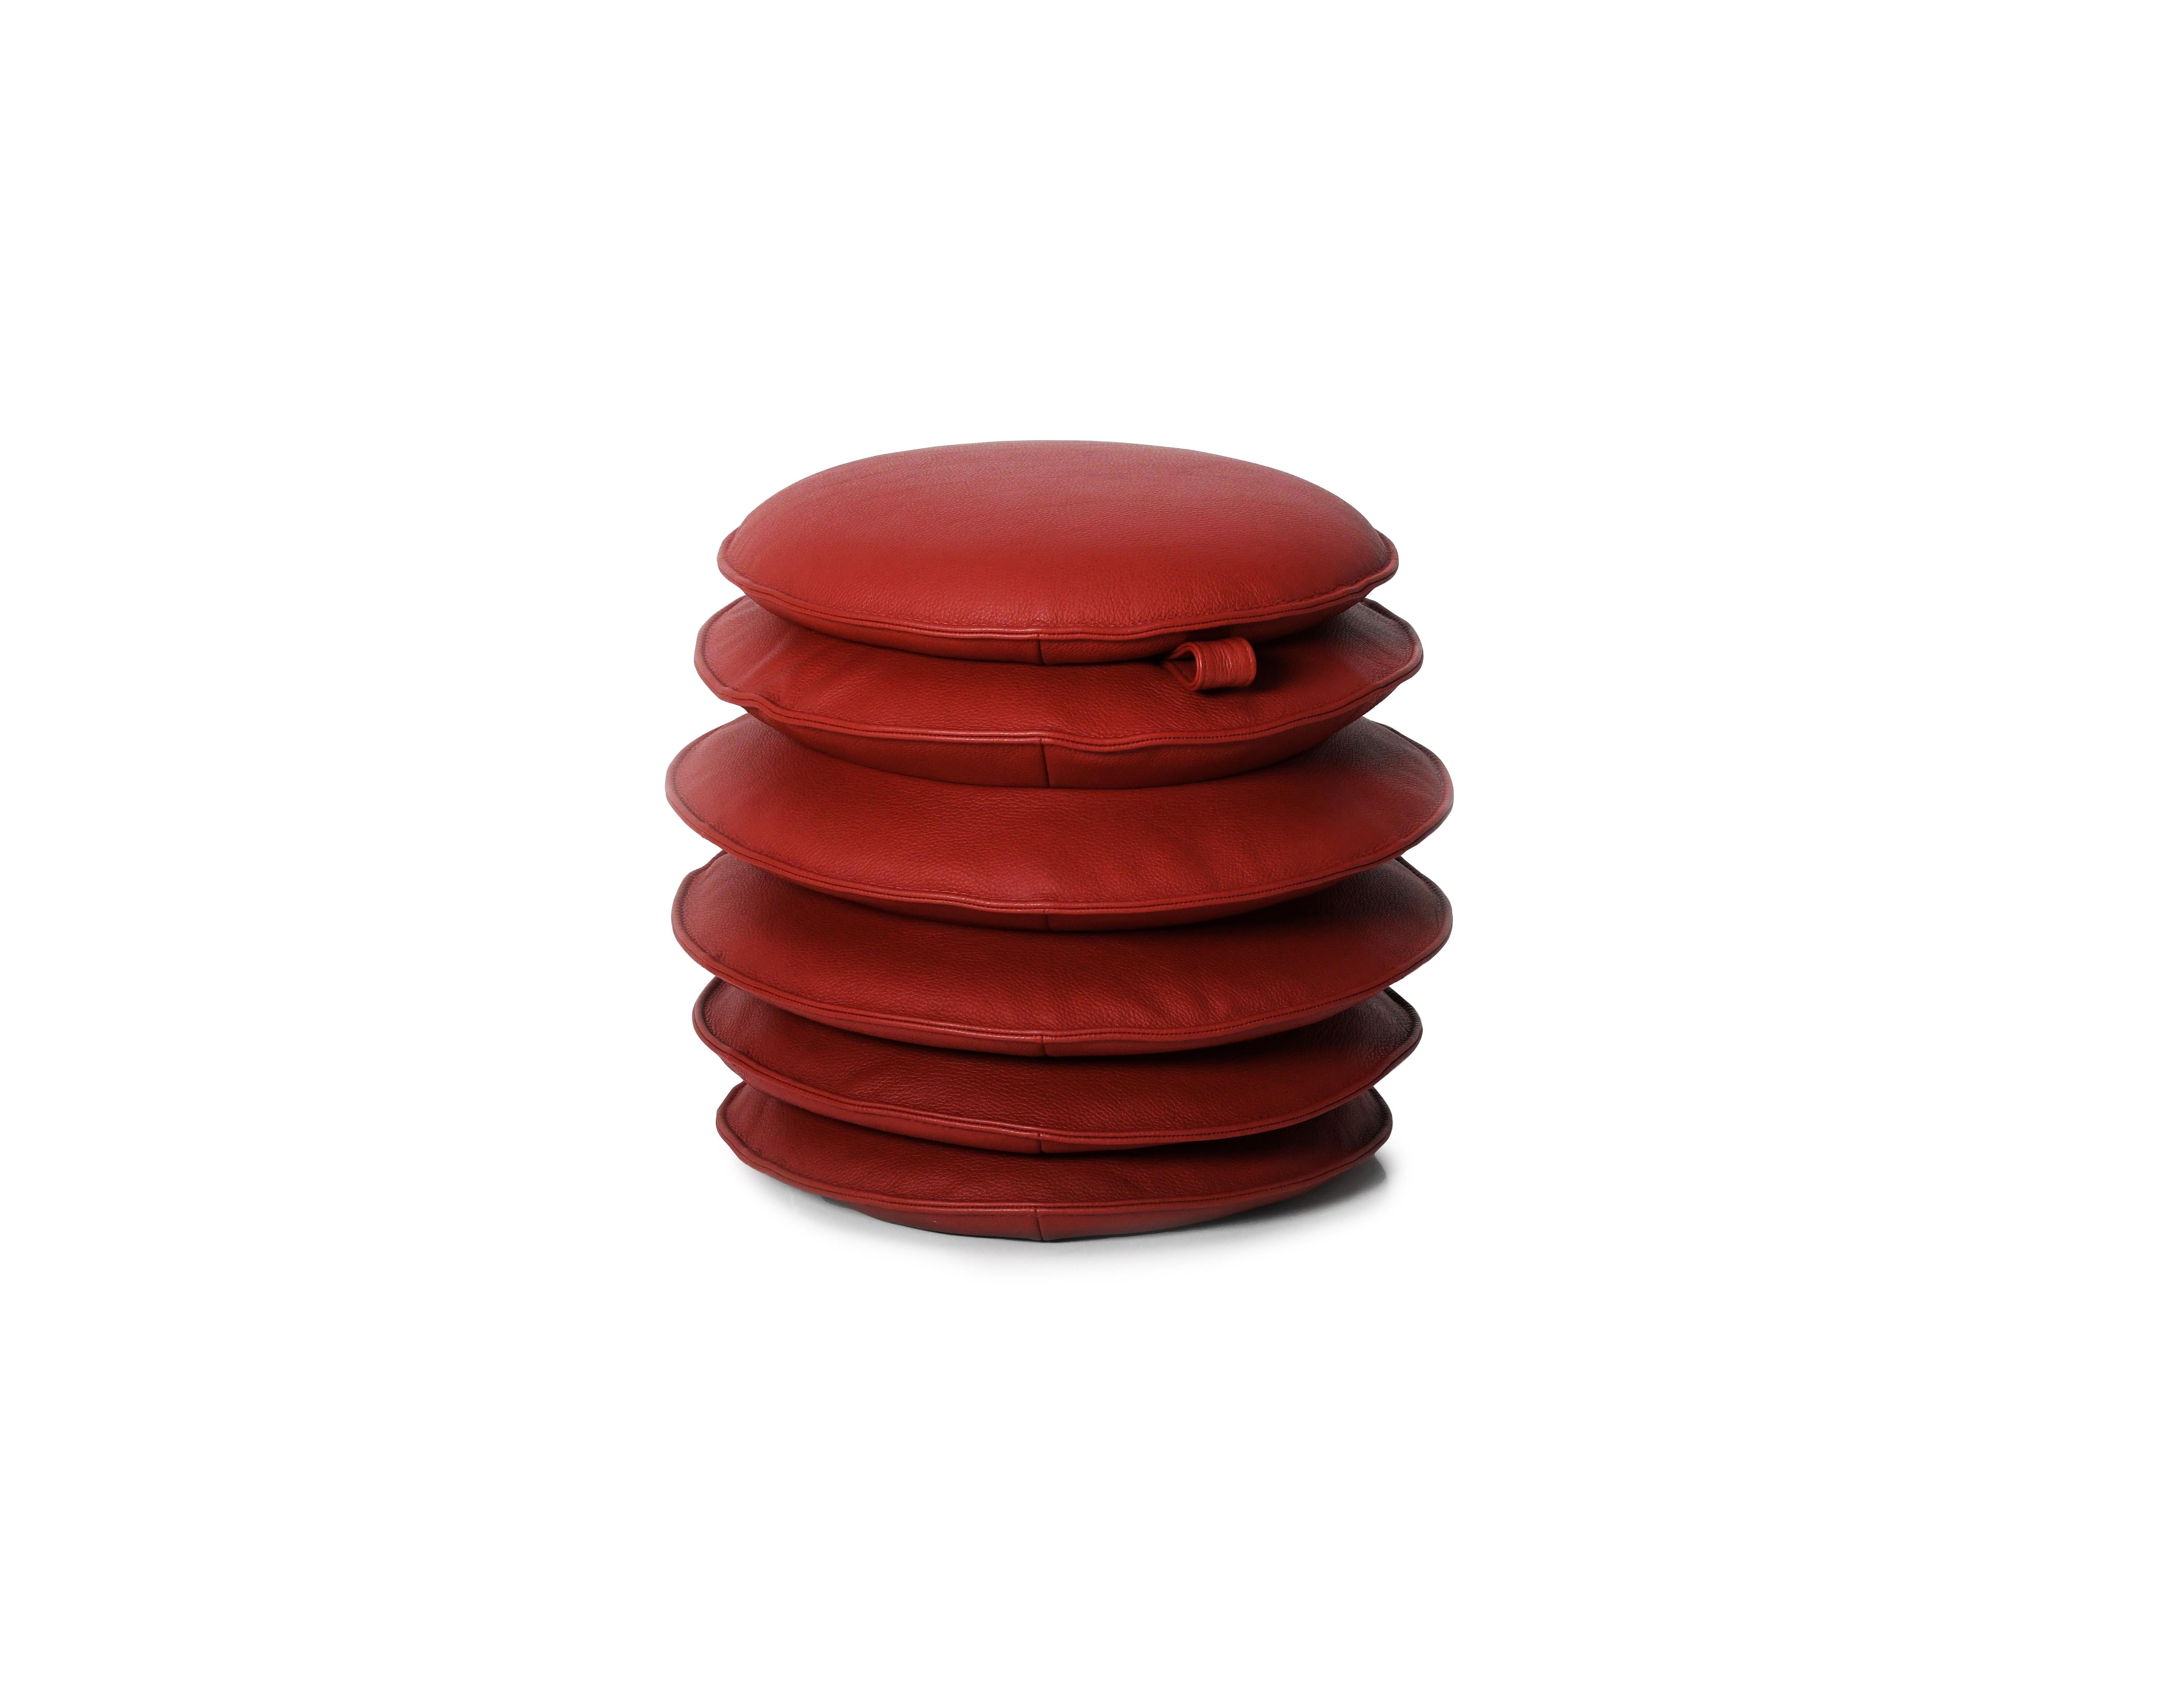 DS-5050 pouf-table by De Sede
Dimensions: D 50 x H 35-46 cm, tabletop D 42
Materials: stone, leather

Prices may change according to the chosen materials and size. 

Piff, paff, pouf: the stool is a table, too

Whether at the lowest height